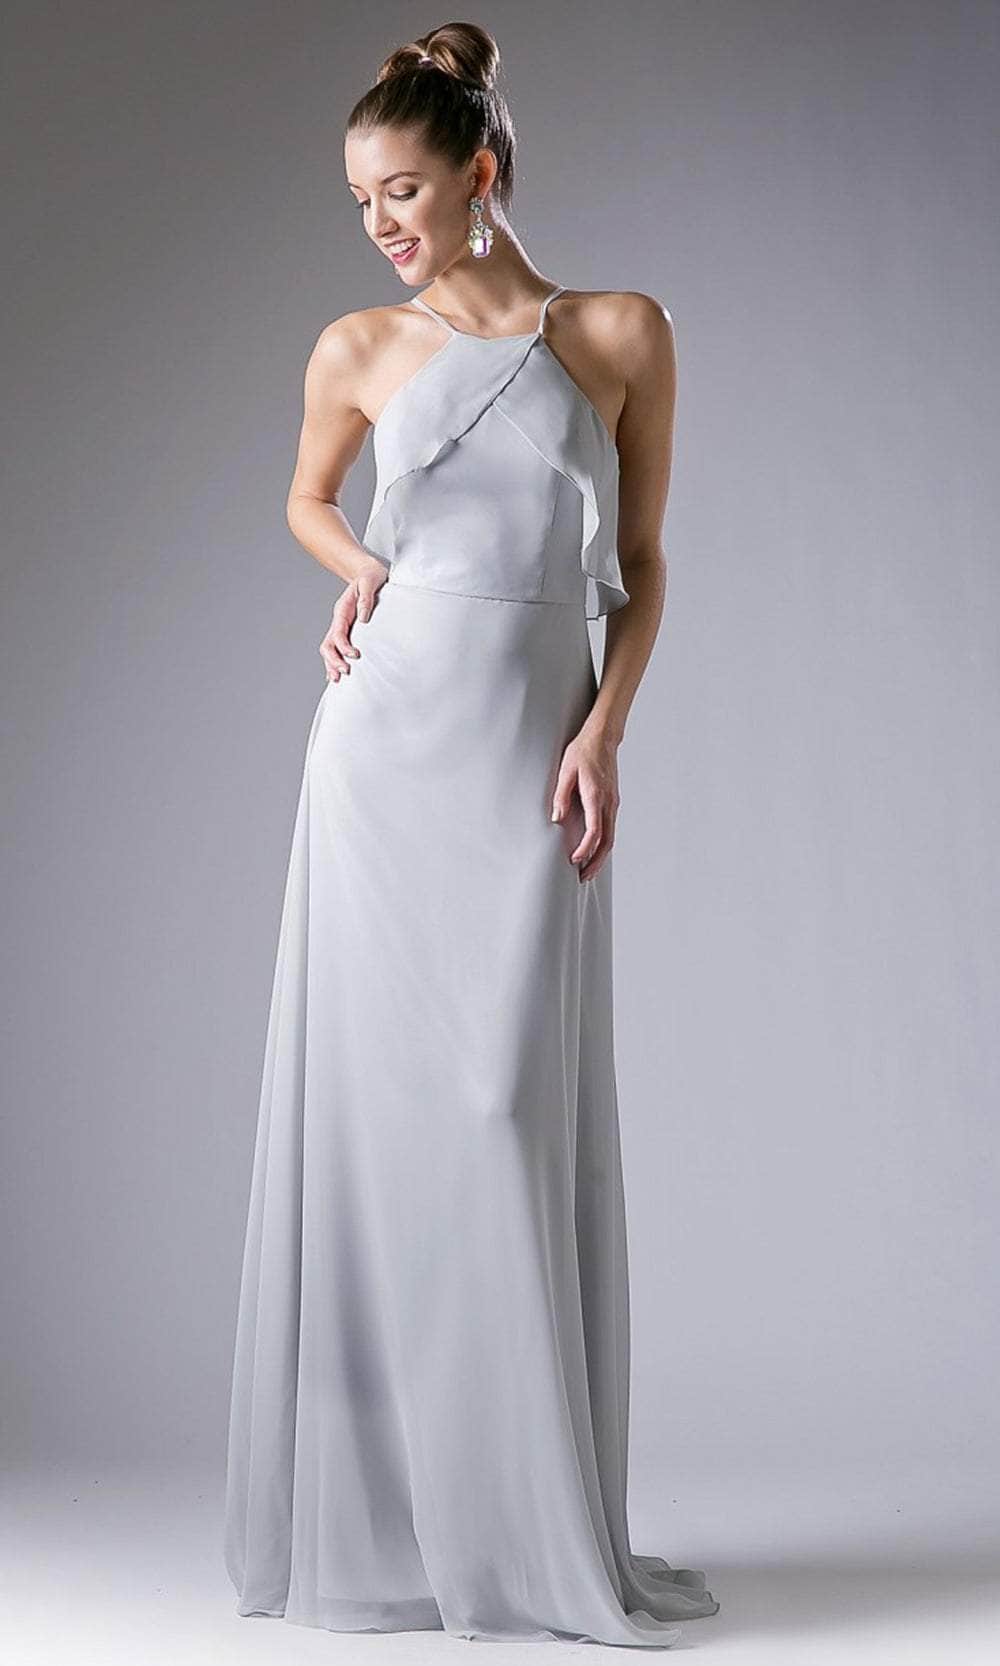 Cinderella Divine 13032 - Simple Thin Strapped Halter Dress Special Occasion Dress